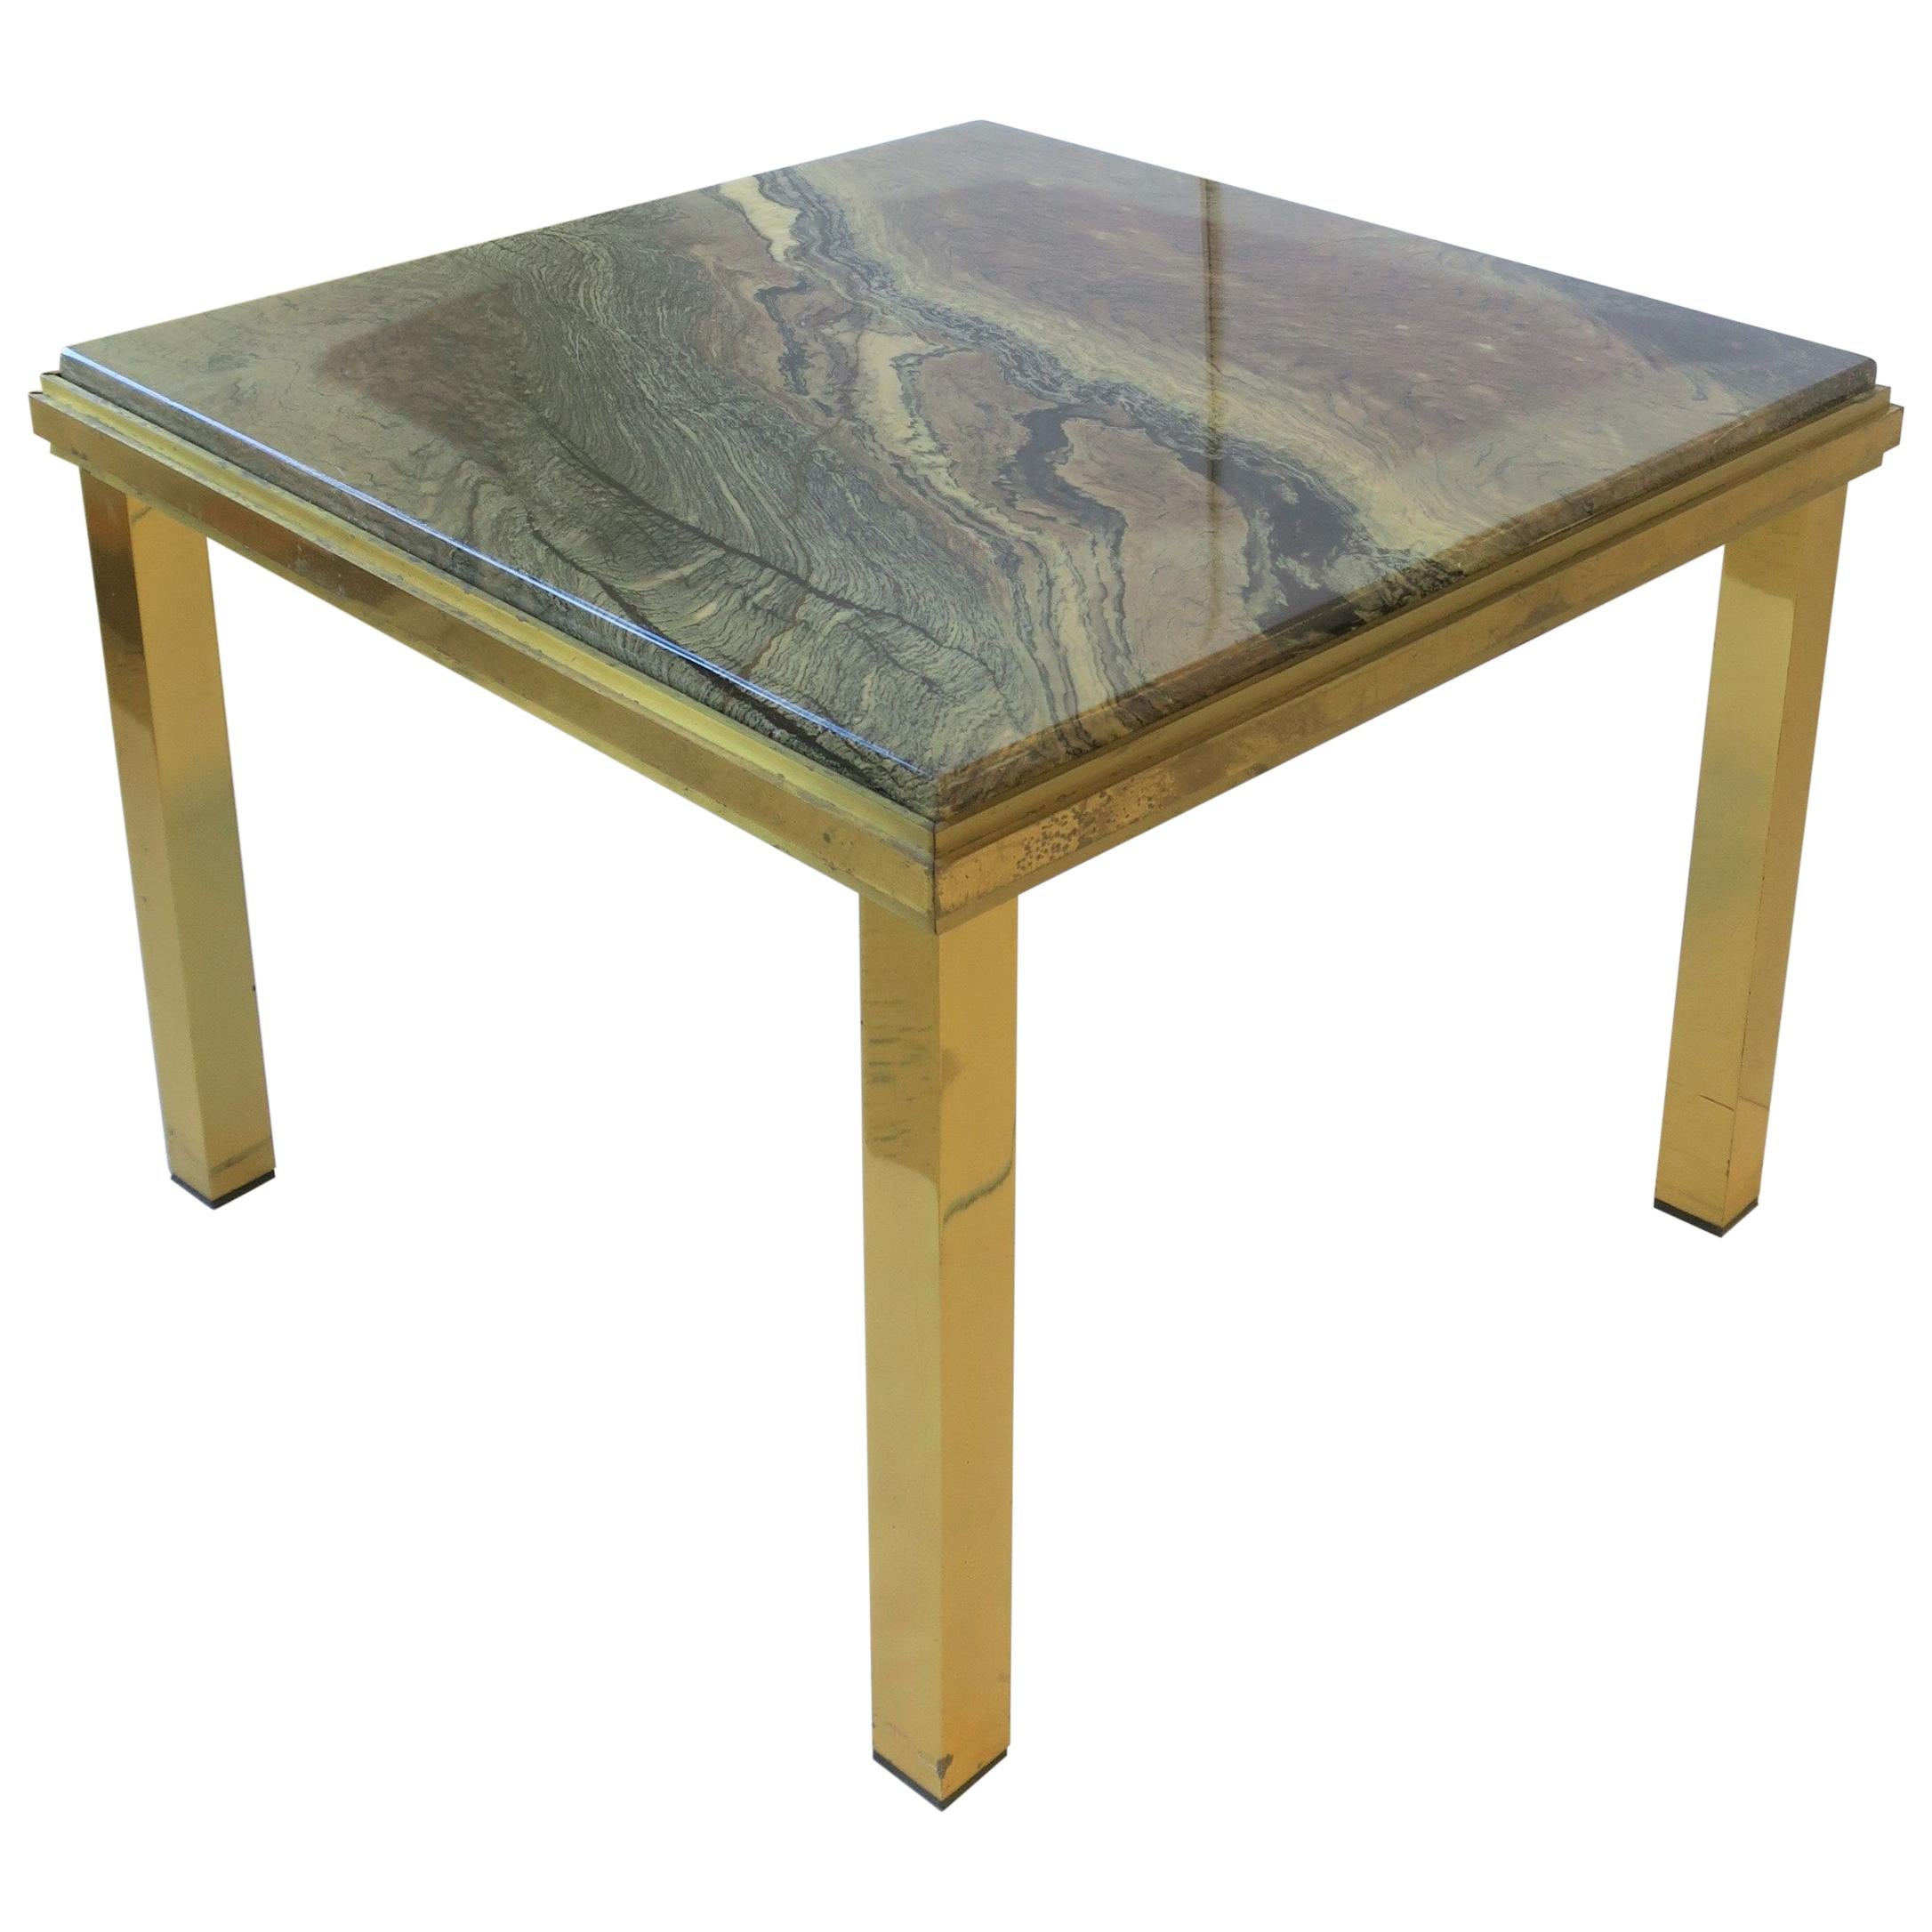 Italian Modern Brass and Marble End Table Willy Rizzo Style, circa 1970s For Sale